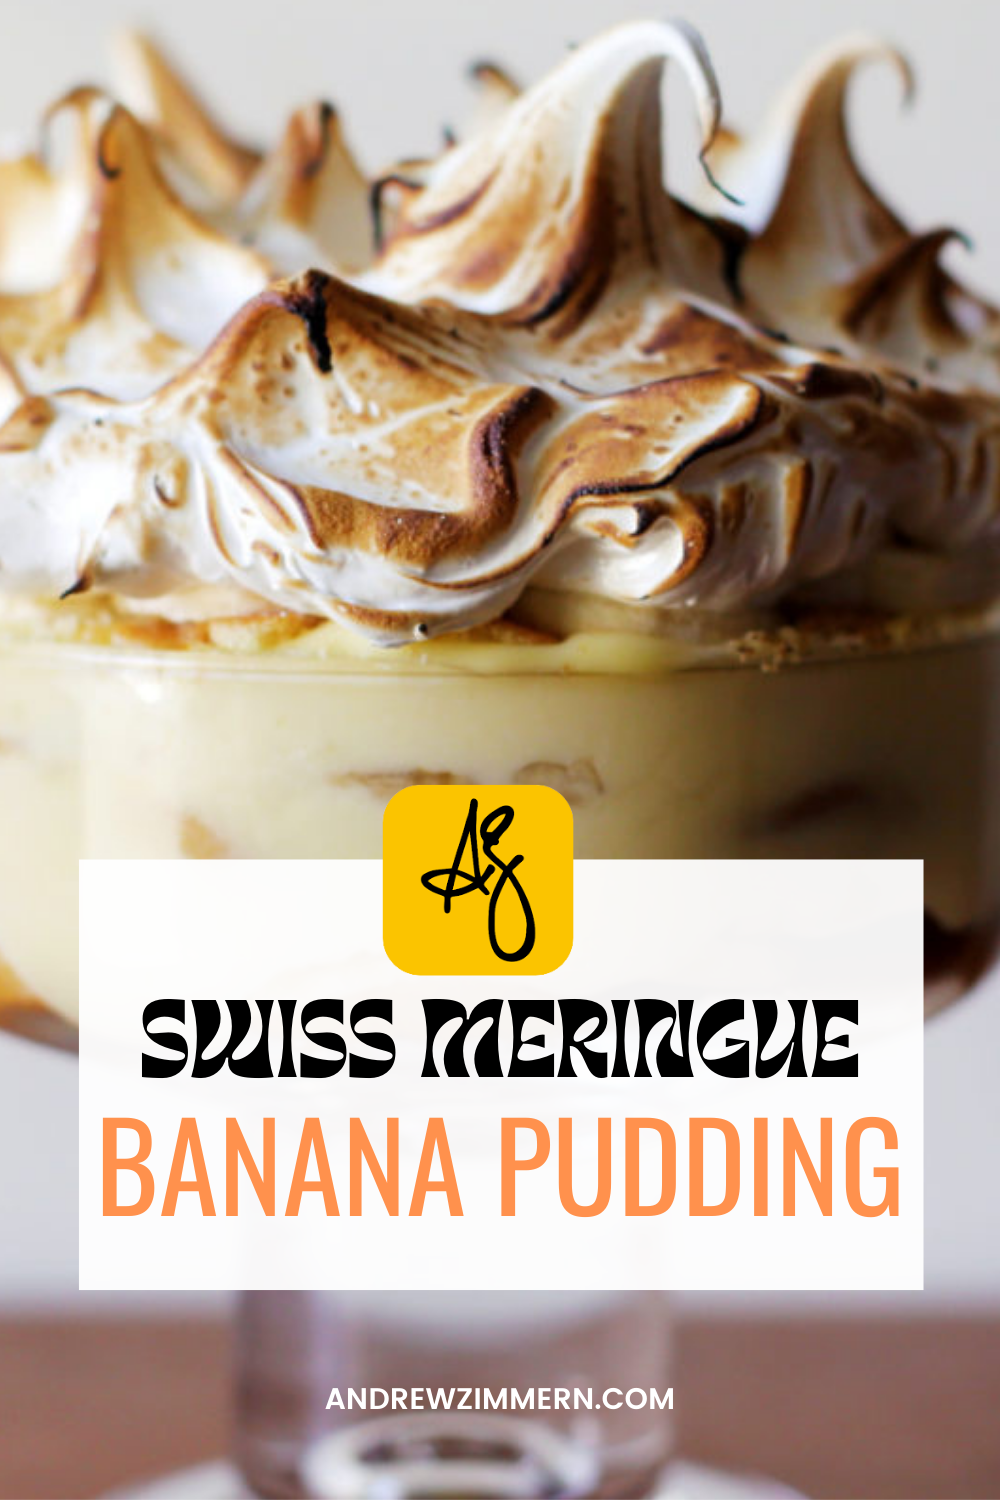 Banana pudding is one of my all time favorite desserts. It helps that this crowd pleaser is super easy to put together and can be made in advance. Top it with meringue for a dramatic presentation, or keep it simple with a dollop of whipped cream.